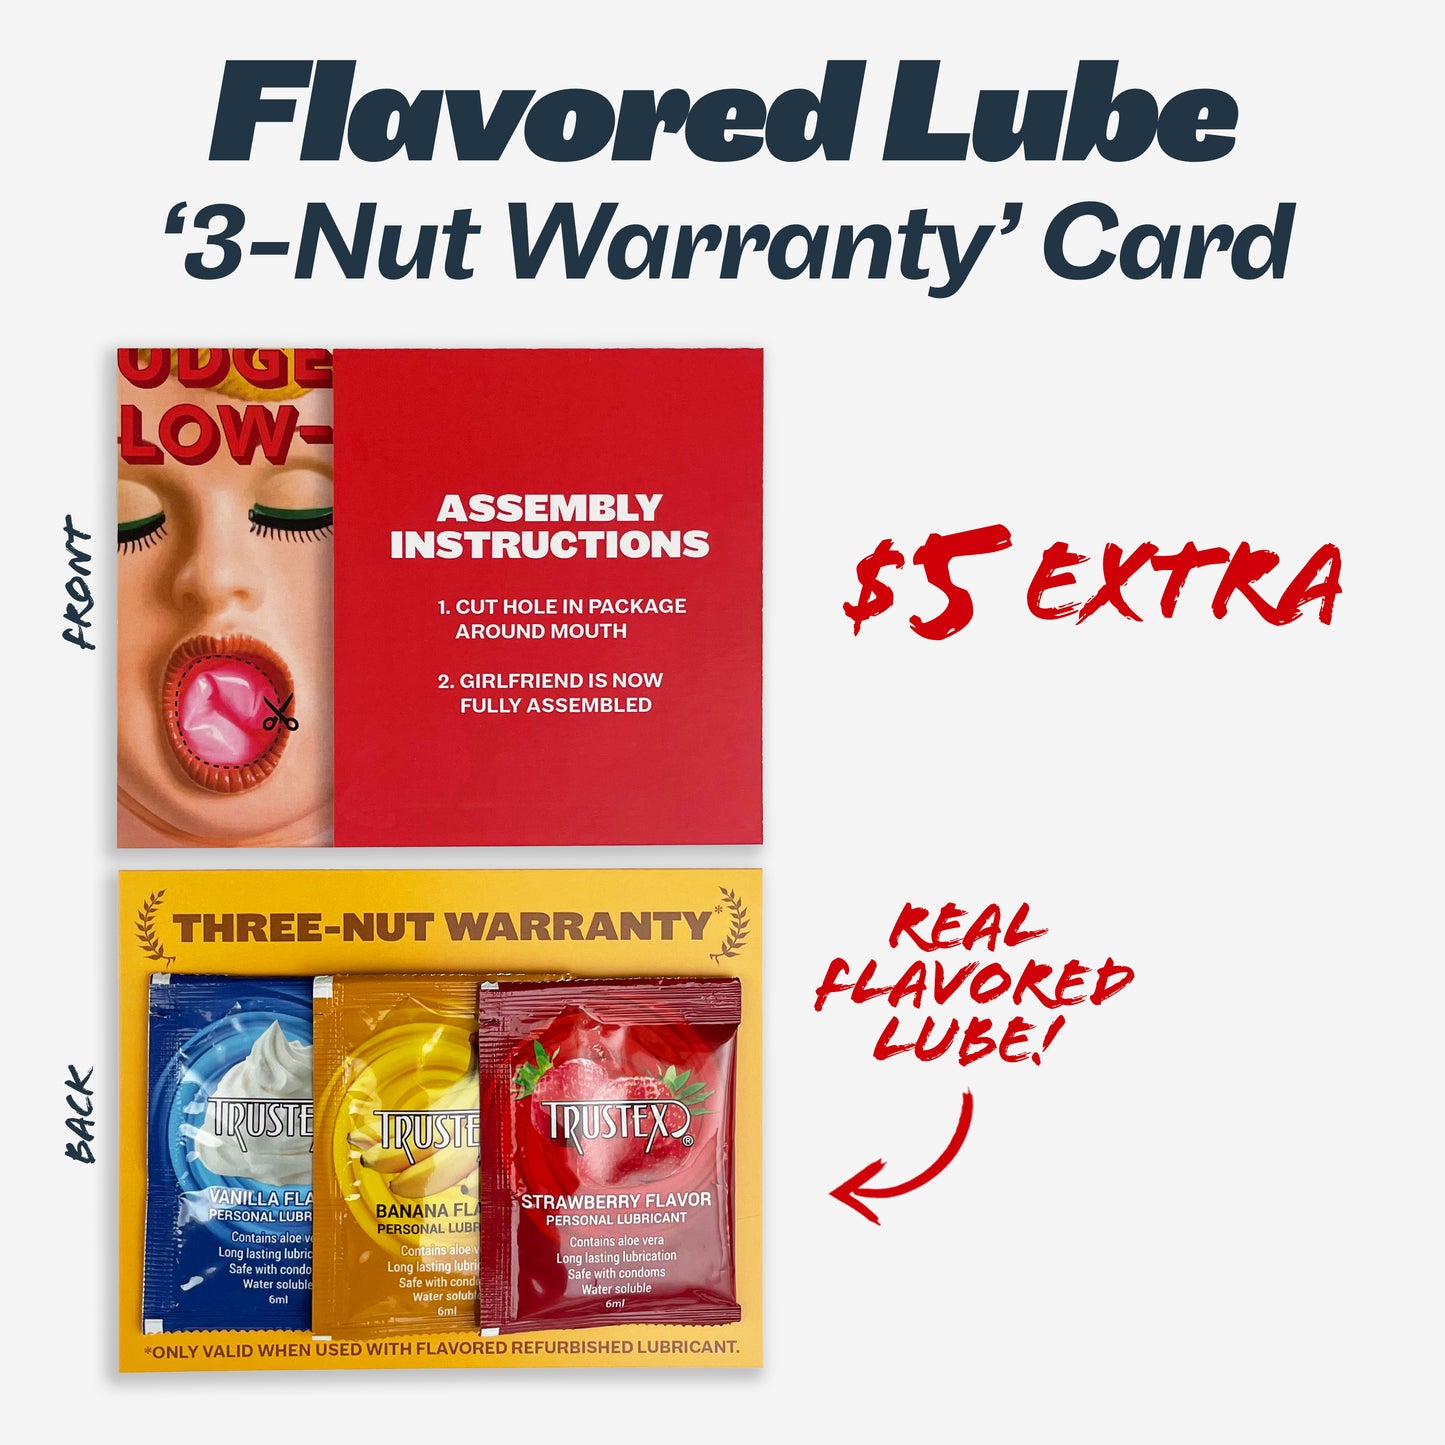 Add 3 packets of flavored lube for only $5 more! Lube packets come glued to a '3-Nut Warranty' card.